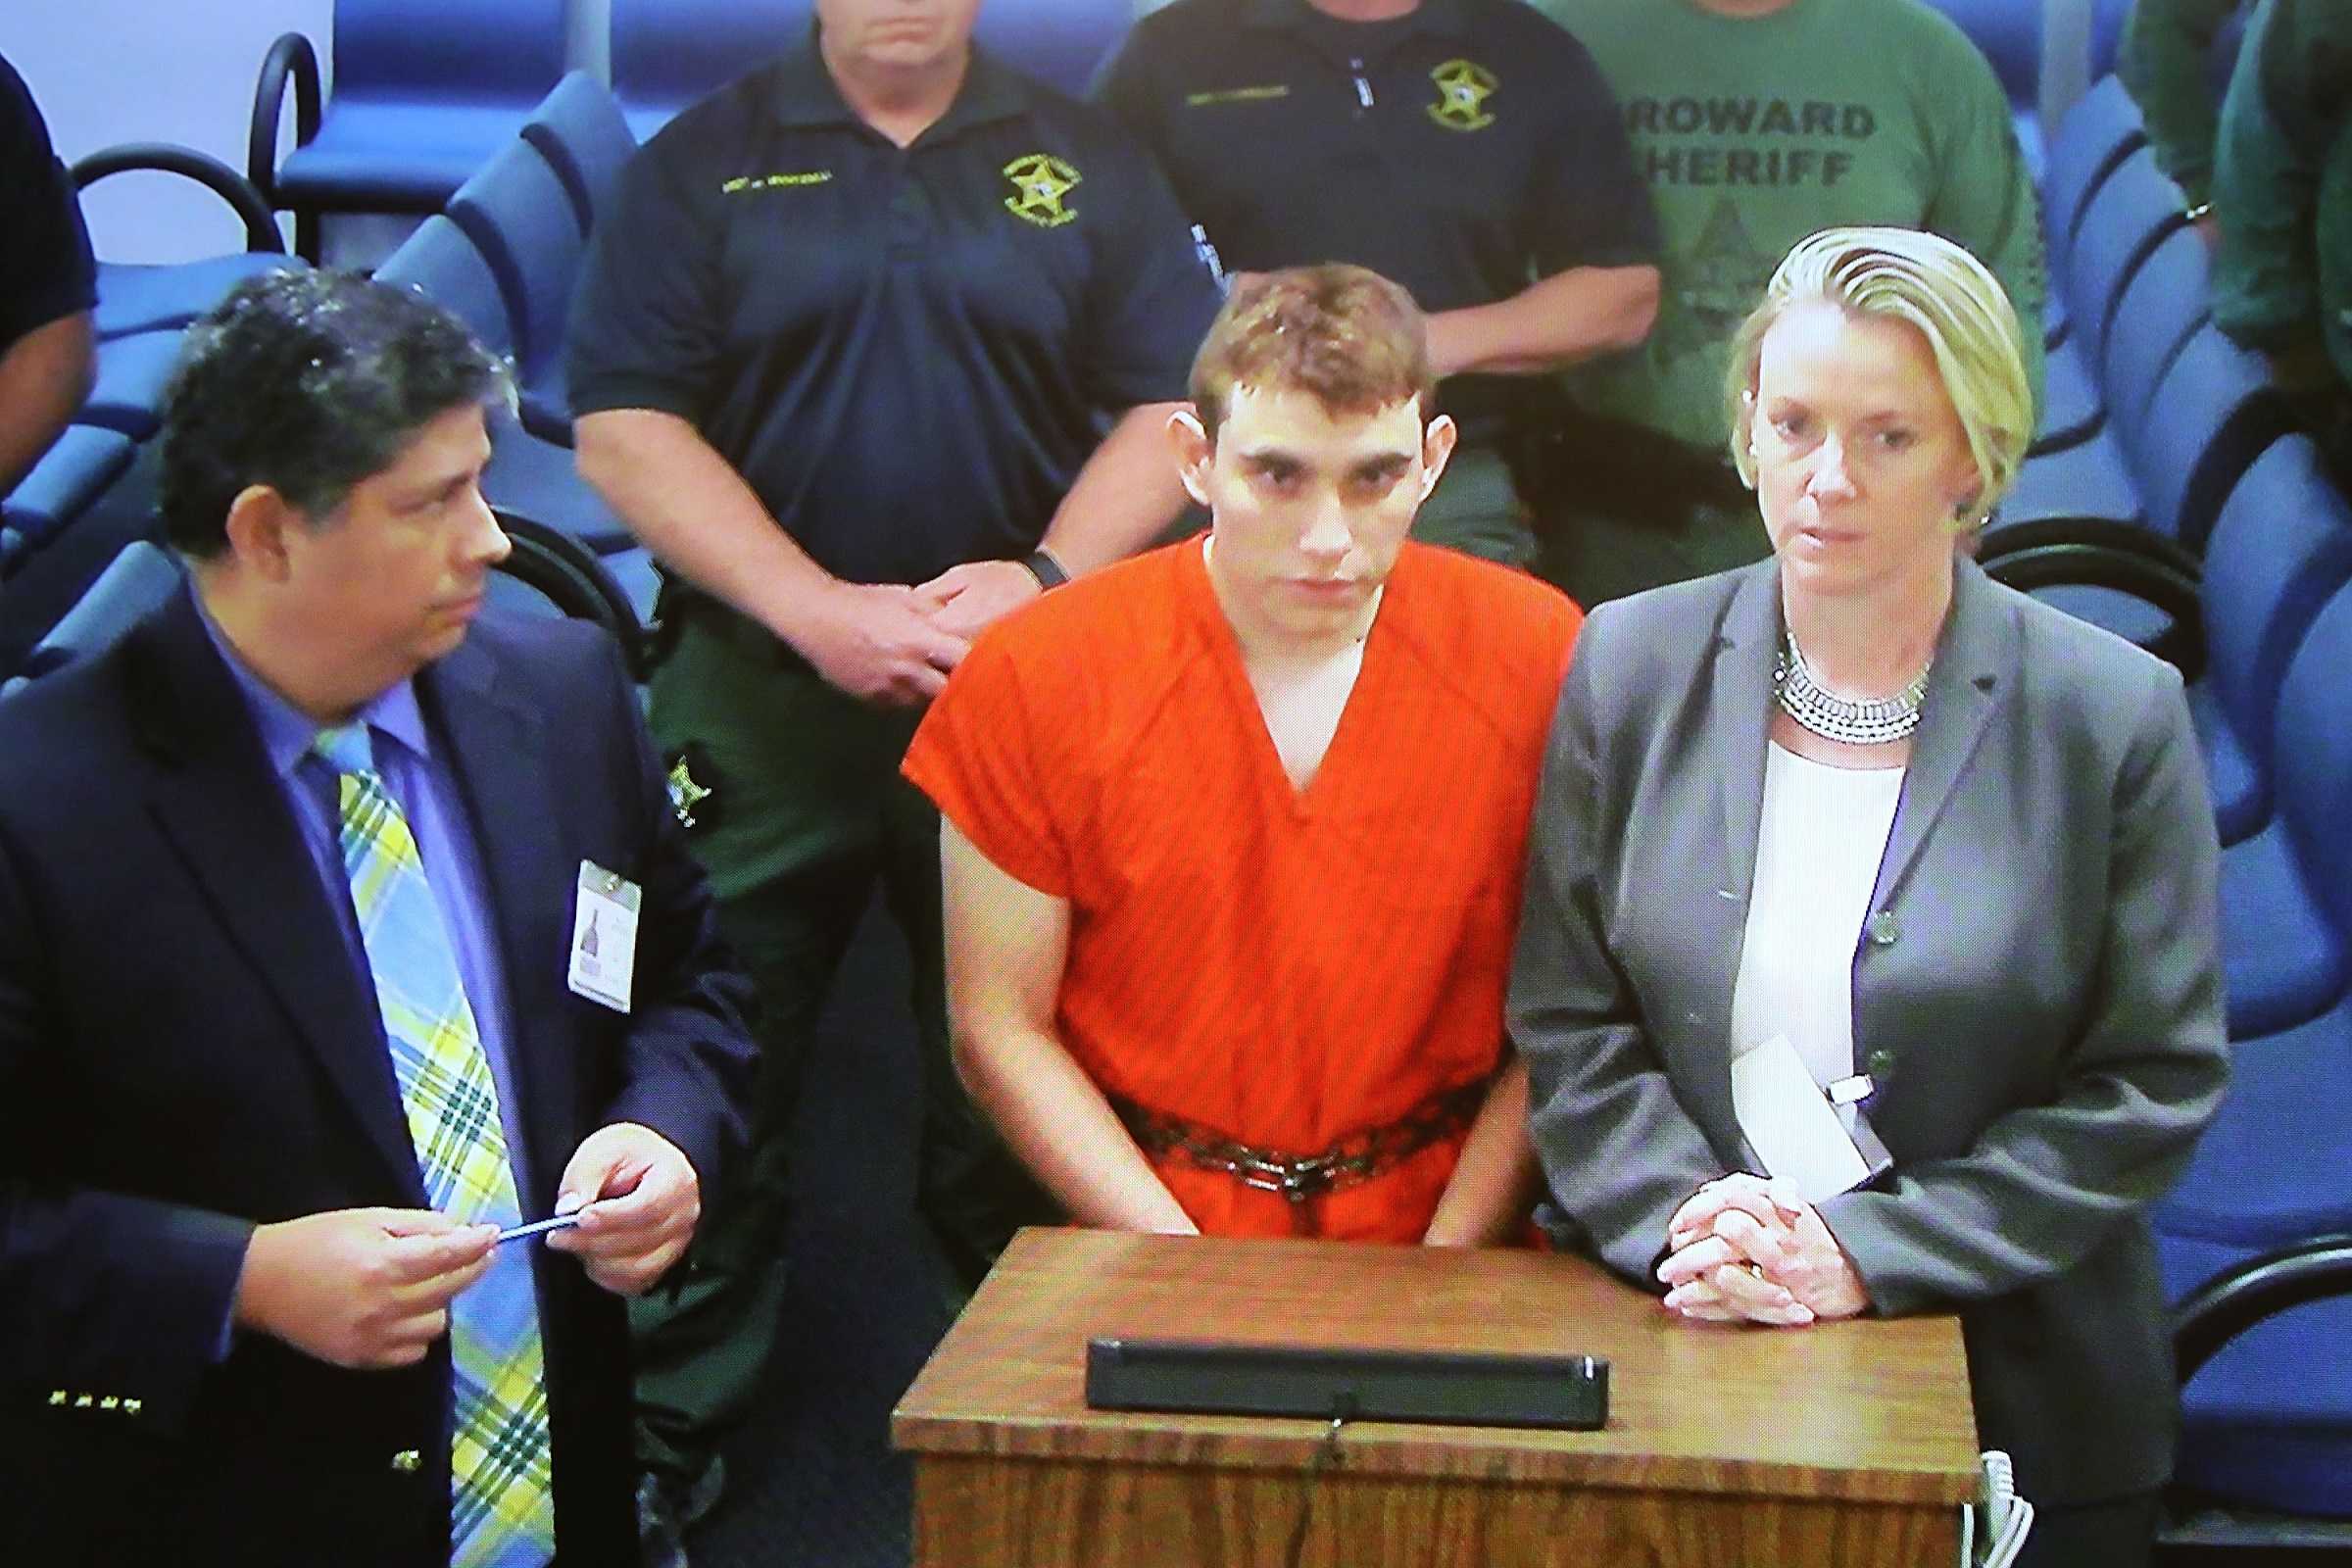 Attorney: Florida shooter willing to plead guilty to avoid death penalty